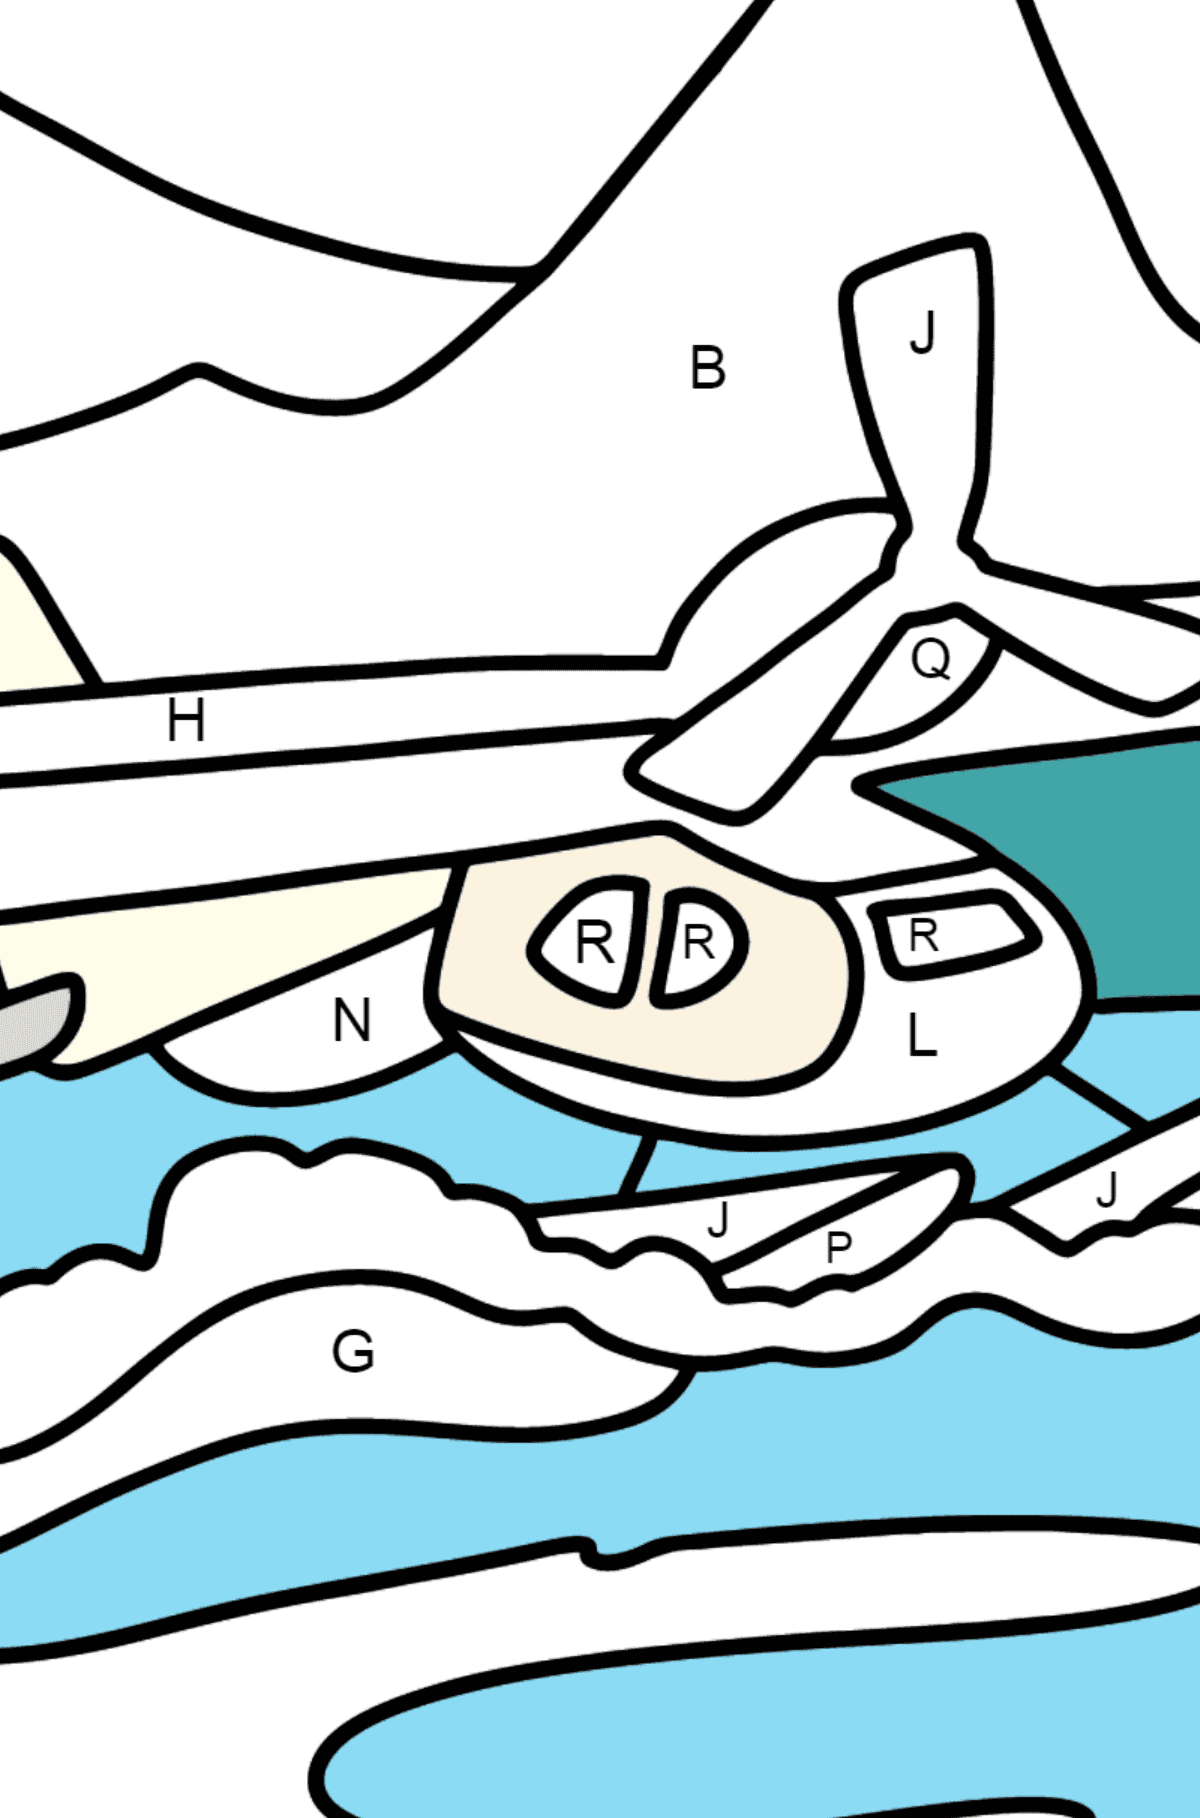 Seaplane coloring page - Coloring by Letters for Kids